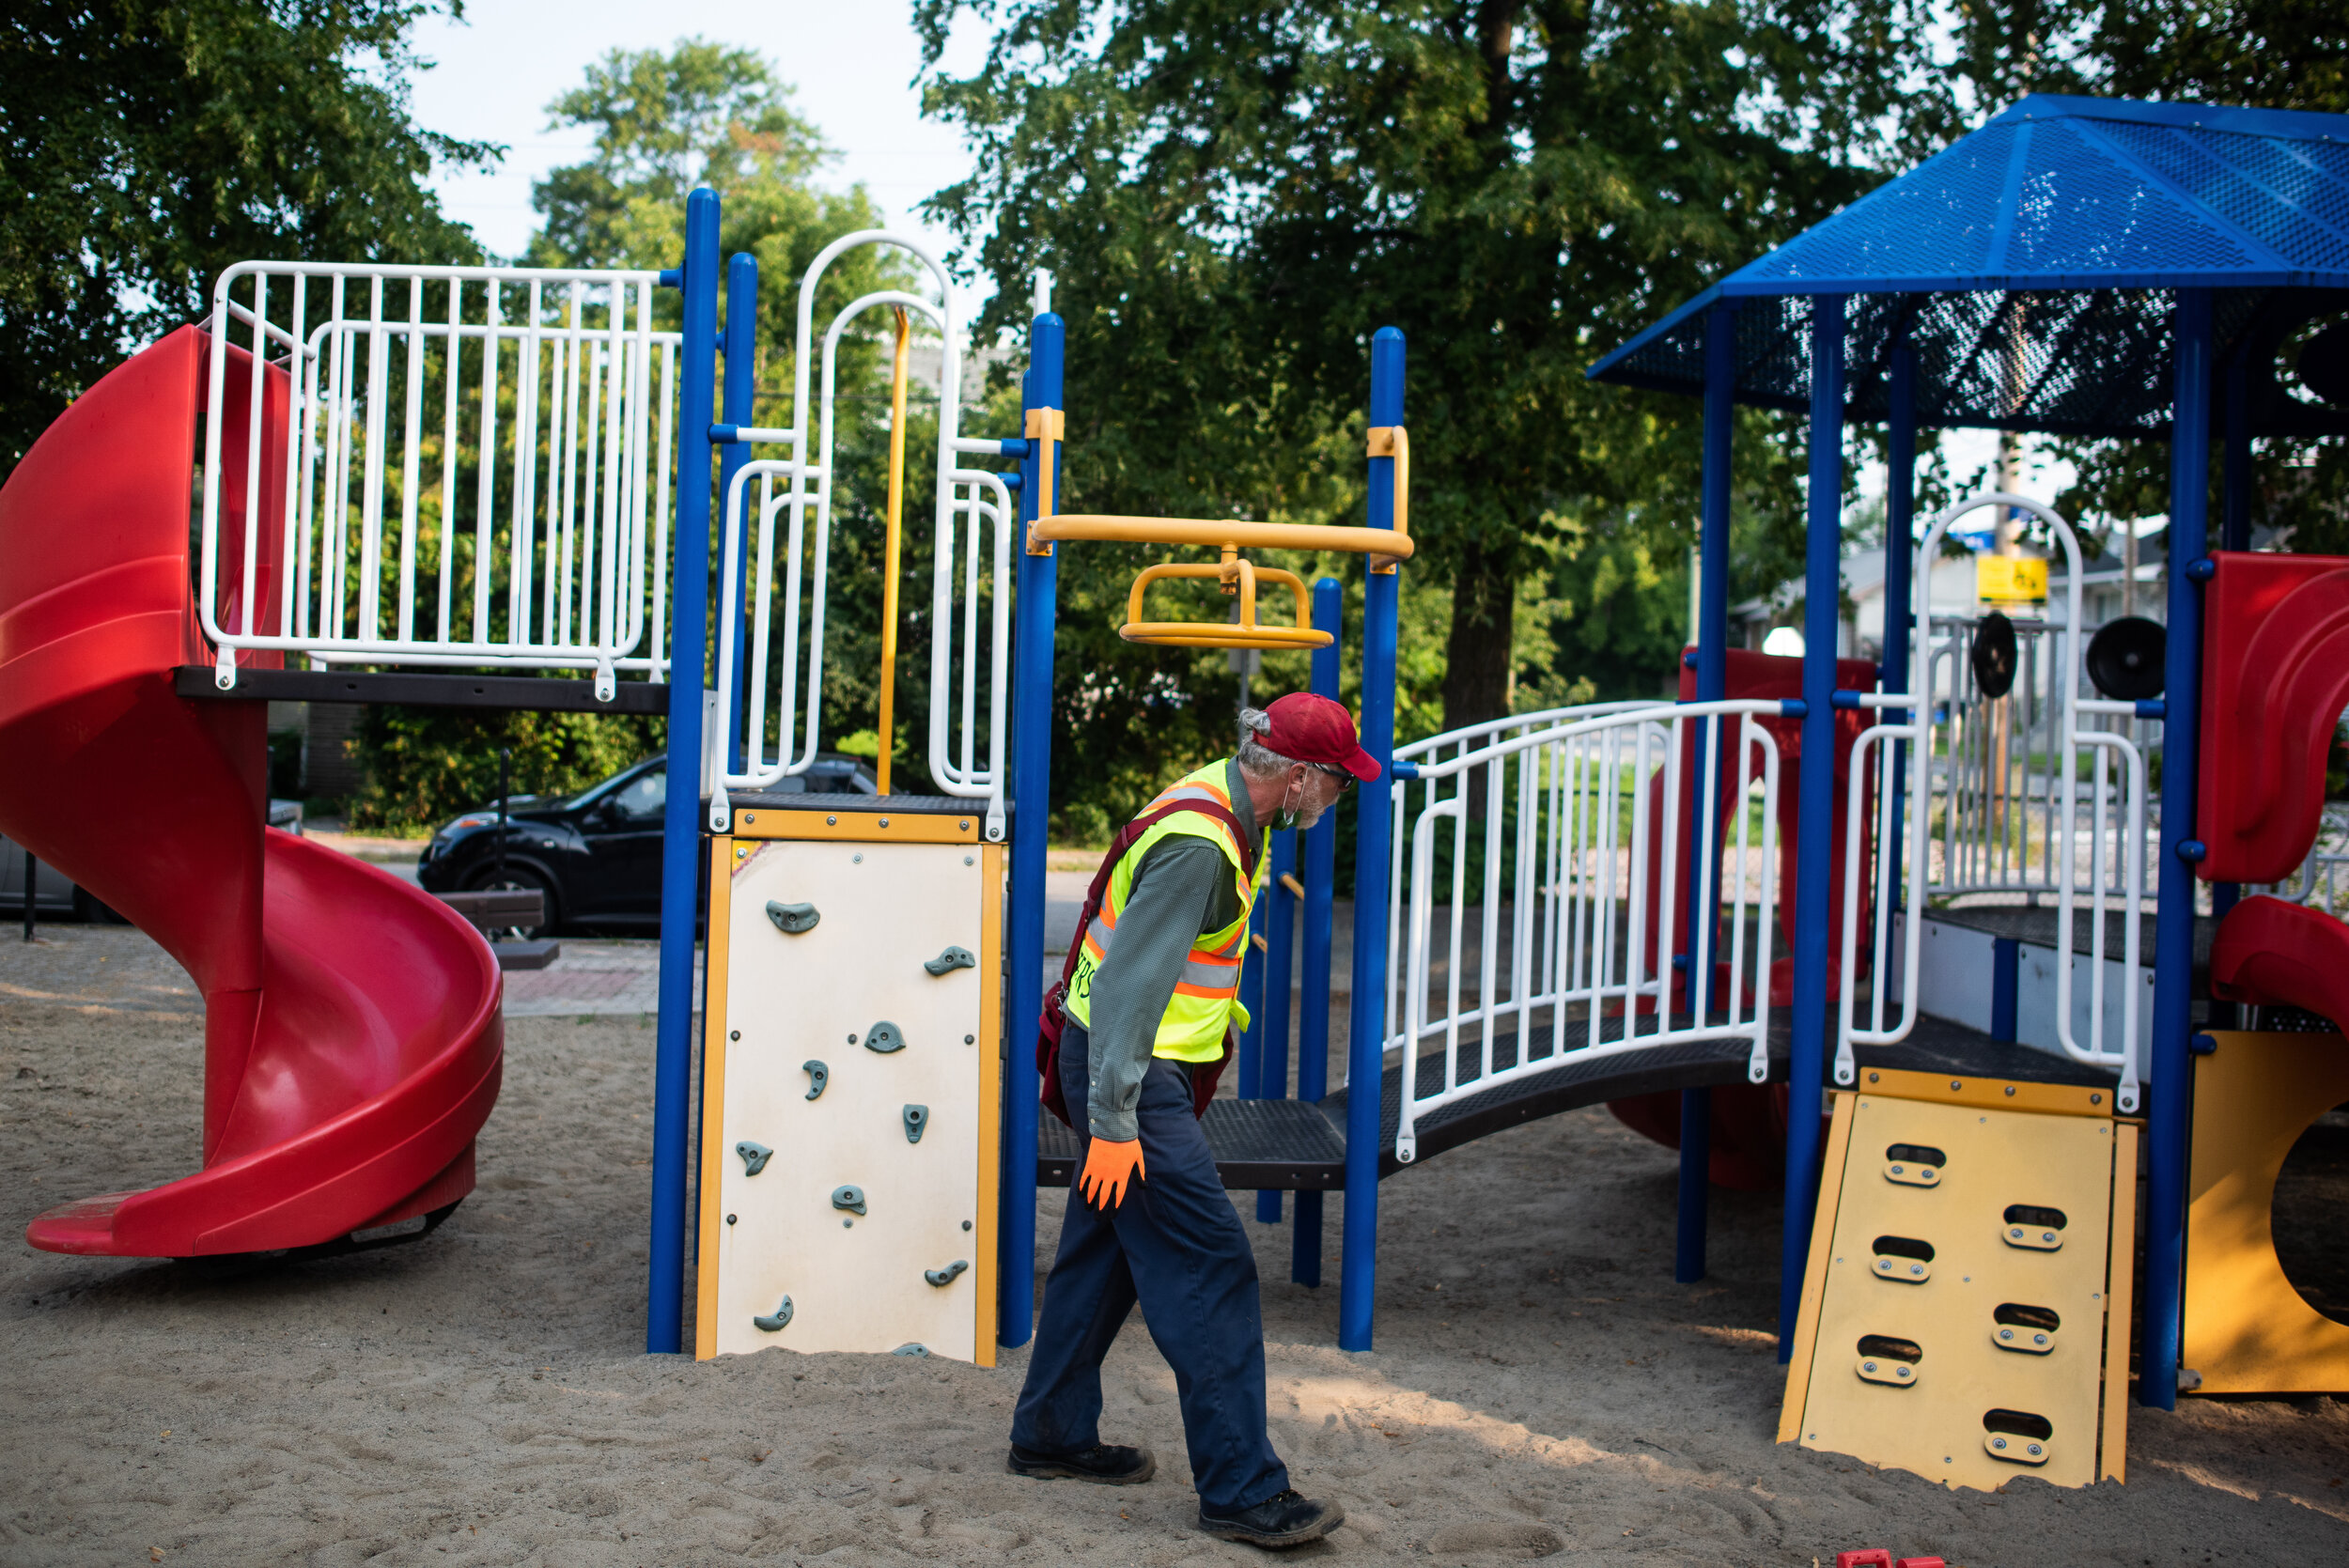  Program manager Justin Byrne says the increasing number of needles collected in parks and playgrounds could reflect an increase in opioid use, or the fact that during the lockdowns people spent more time in these spaces and were more likely to repor